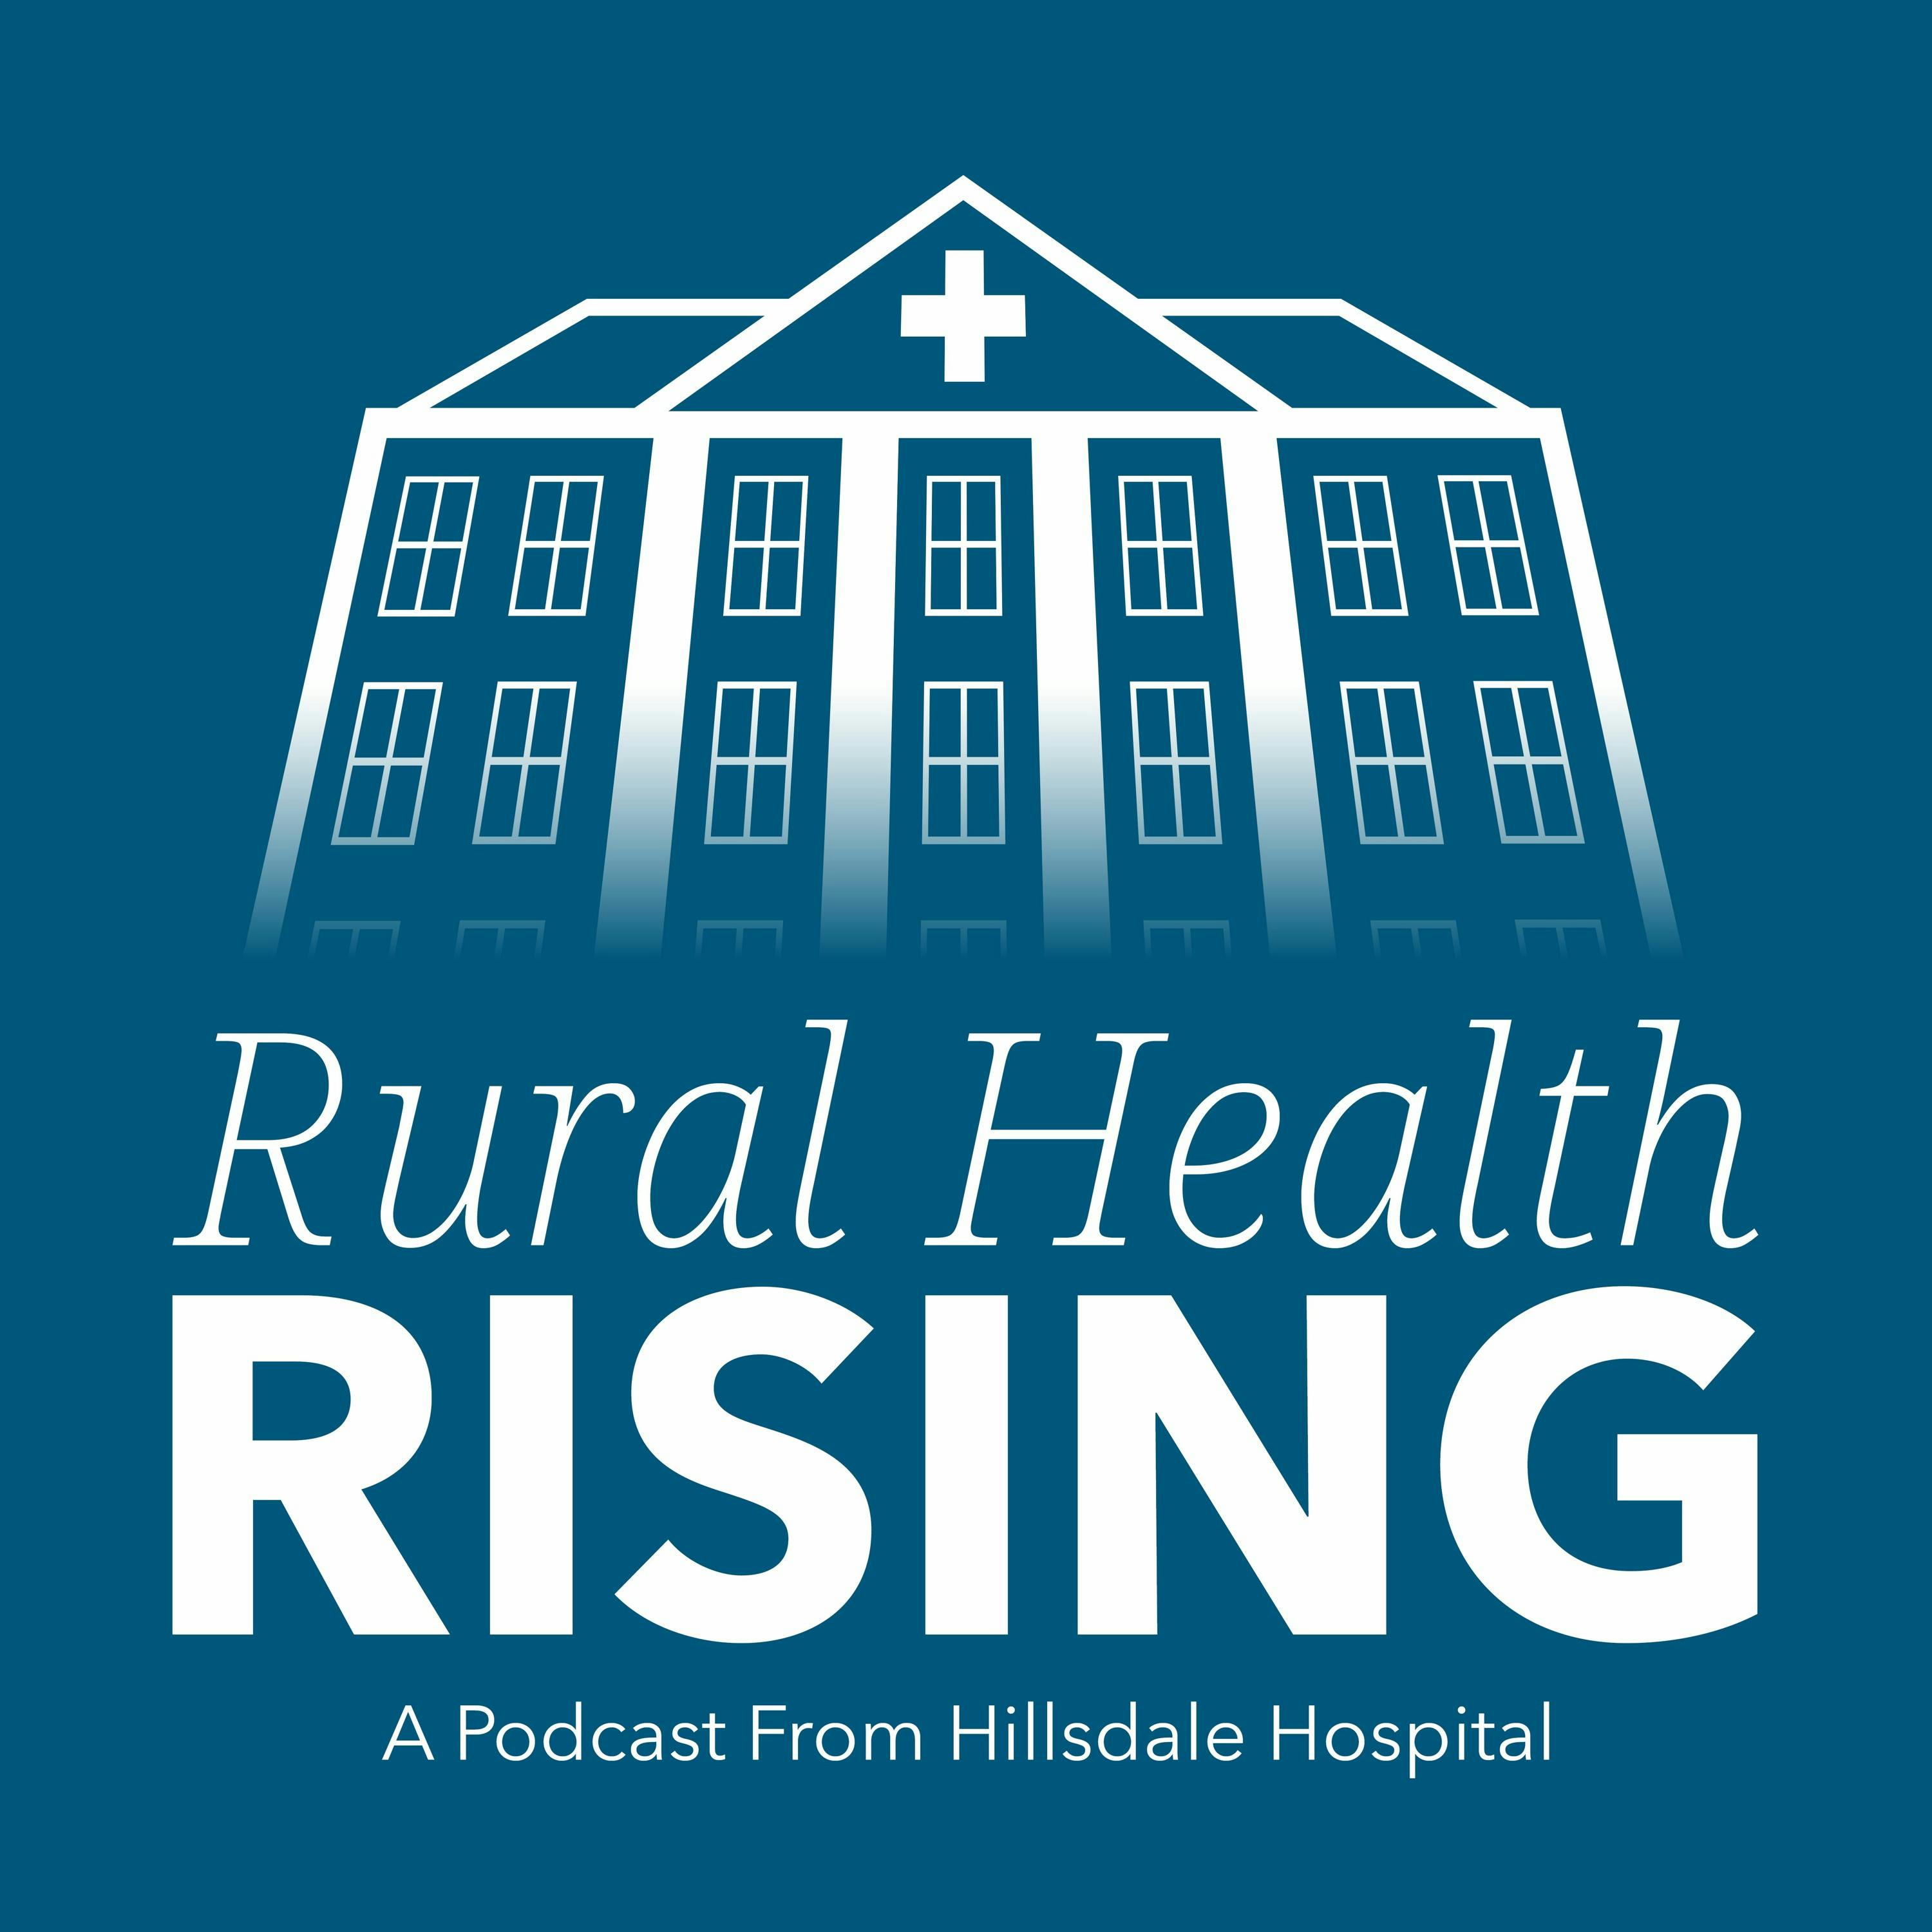 Episode 31: The Road to the Rural CEO